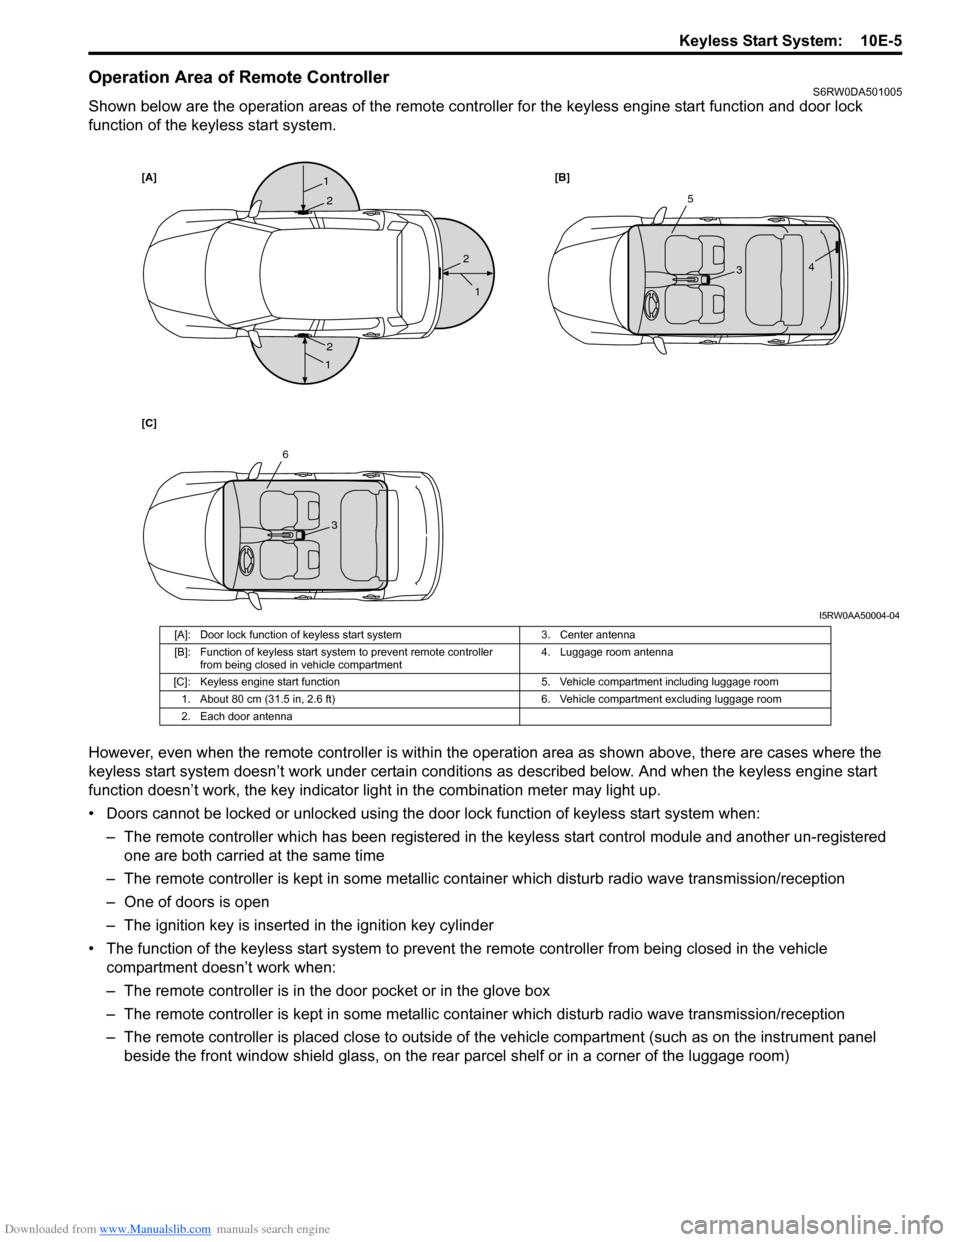 SUZUKI SX4 2006 1.G Service Workshop Manual Downloaded from www.Manualslib.com manuals search engine Keyless Start System:  10E-5
Operation Area of Remote ControllerS6RW0DA501005
Shown below are the operation areas of the remote controller for 